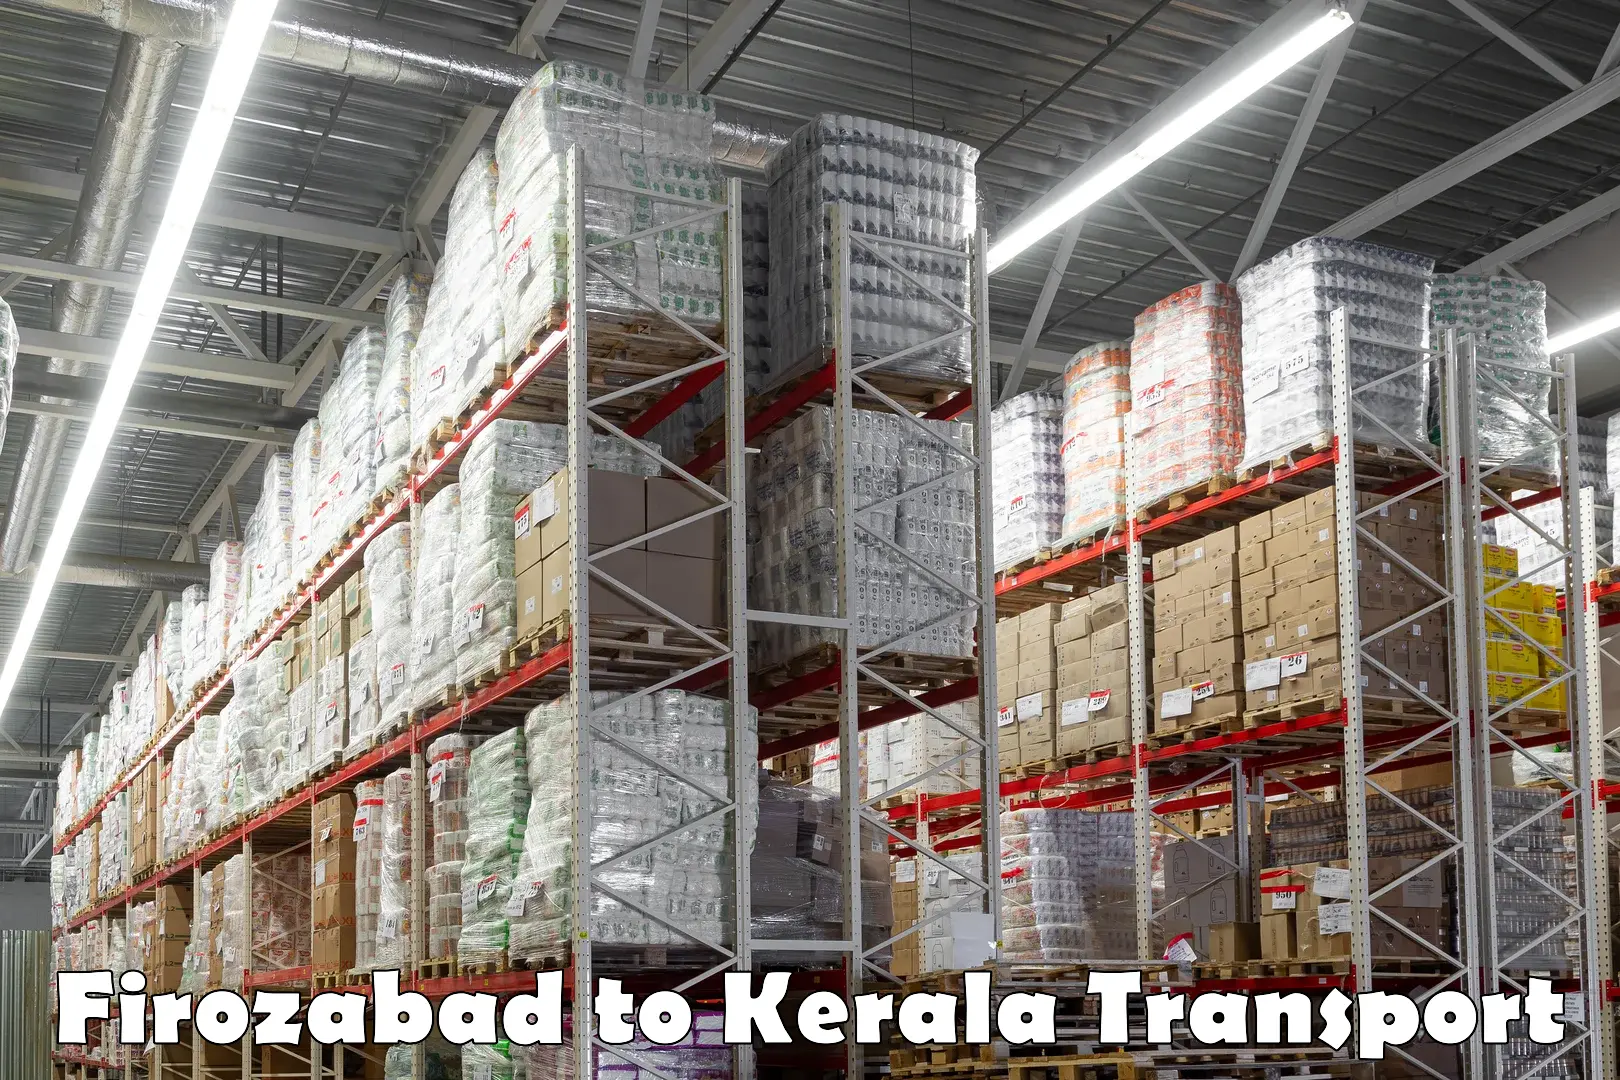 Goods delivery service Firozabad to Kunnamkulam